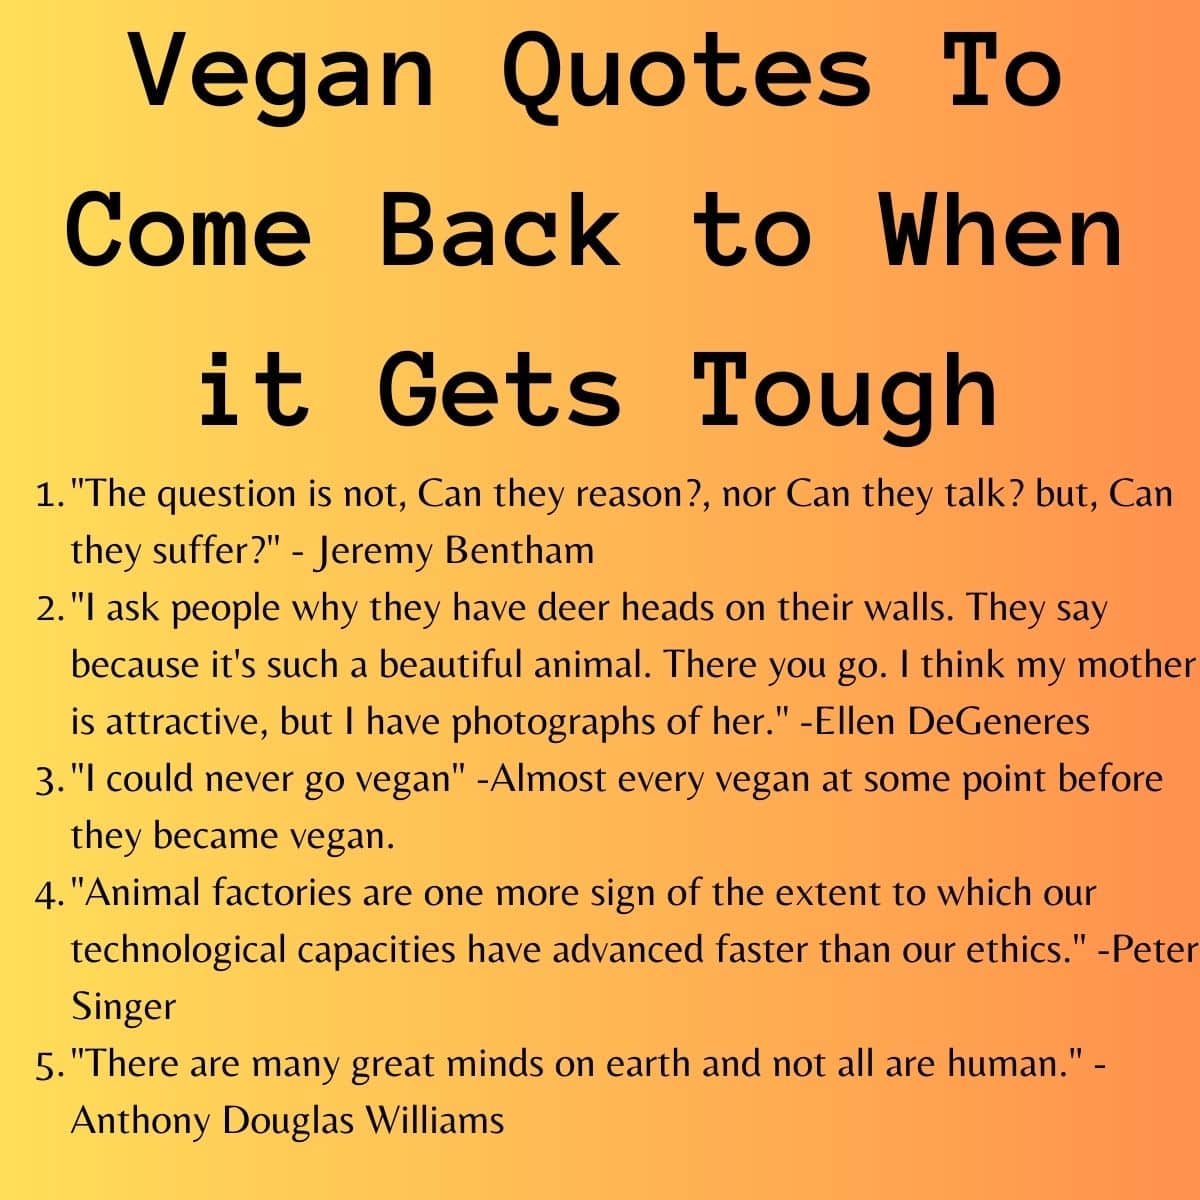 Text title reads: vegan quotes to come back to when it gets tough. 5 quotes (also displayed in following text) are included.